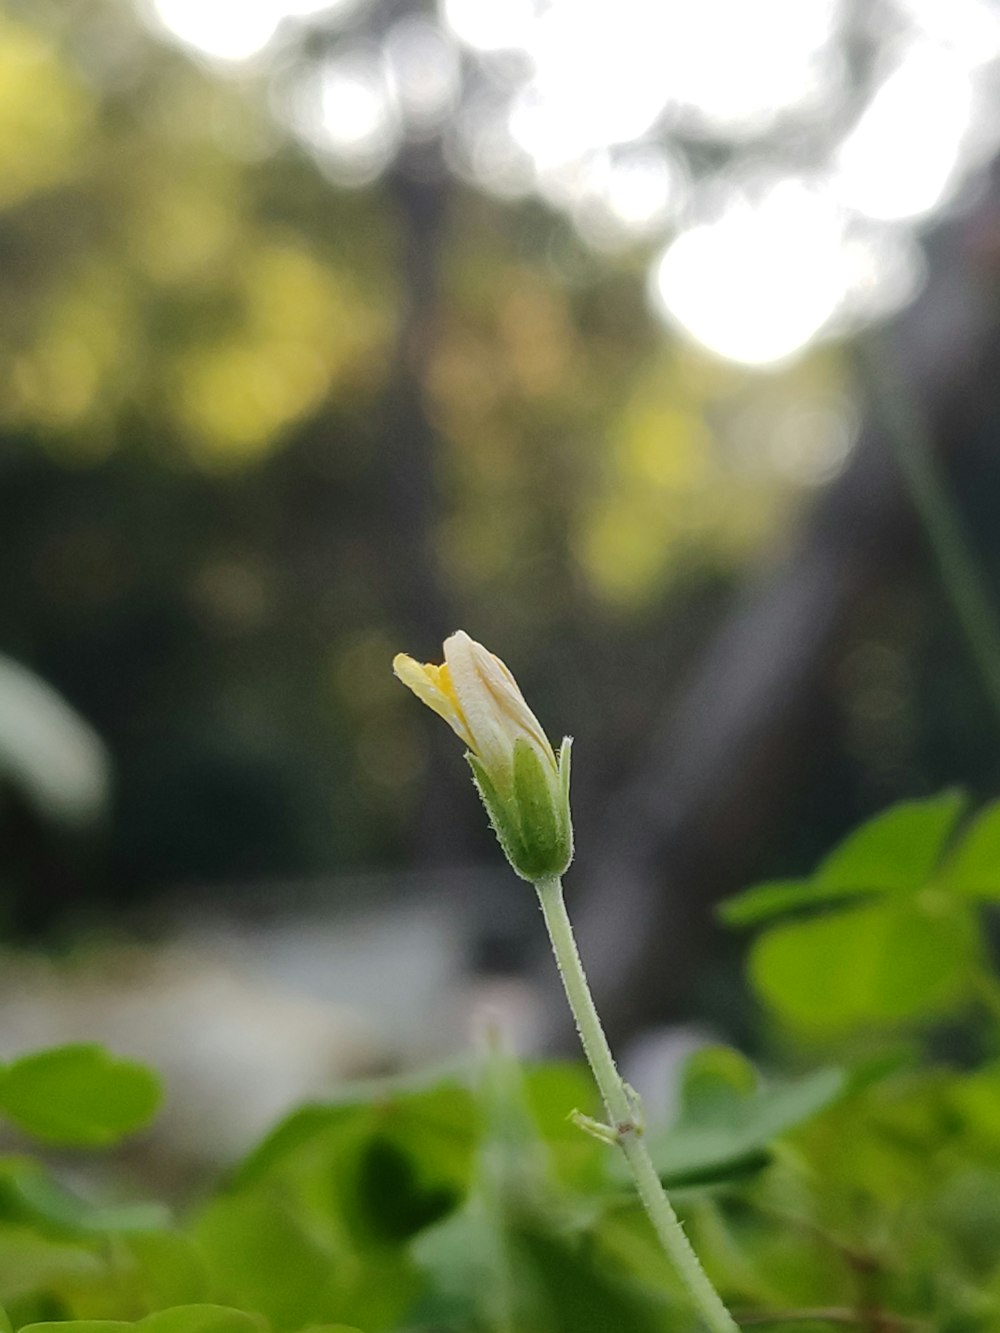 a small white flower with a green stem